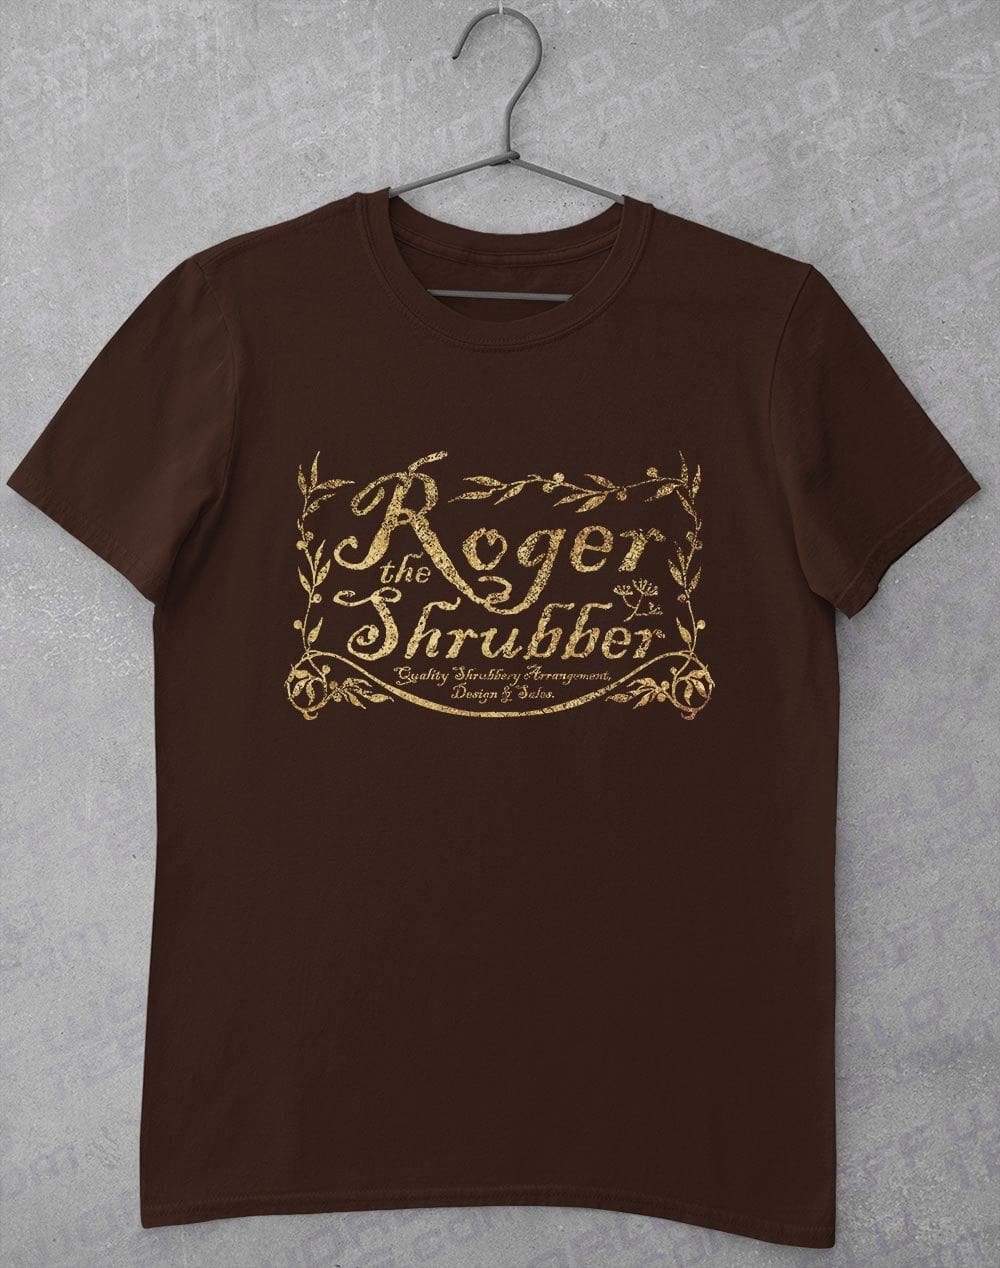 Roger the Shrubber T-Shirt S / Dark Chocolate  - Off World Tees